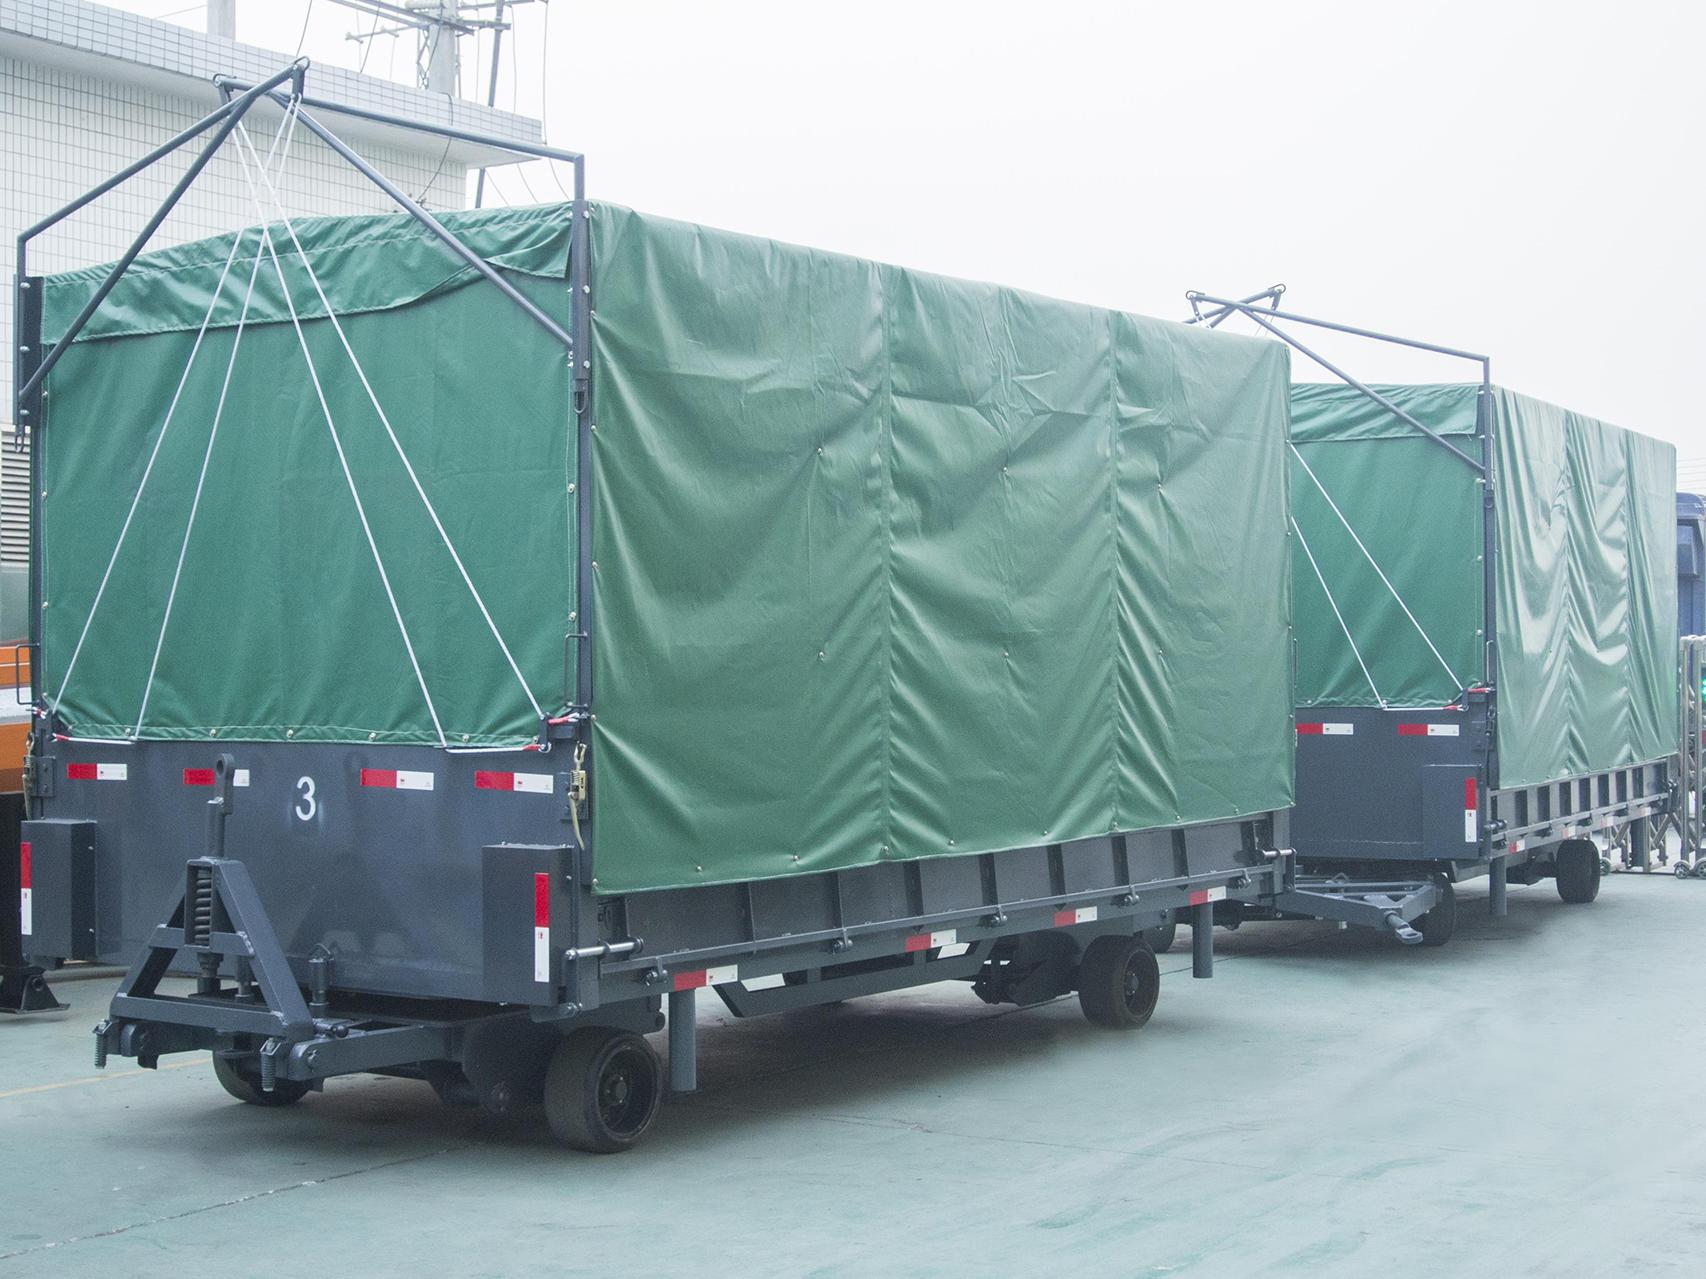 Case of BYD Customized Winged Canopy Trailer